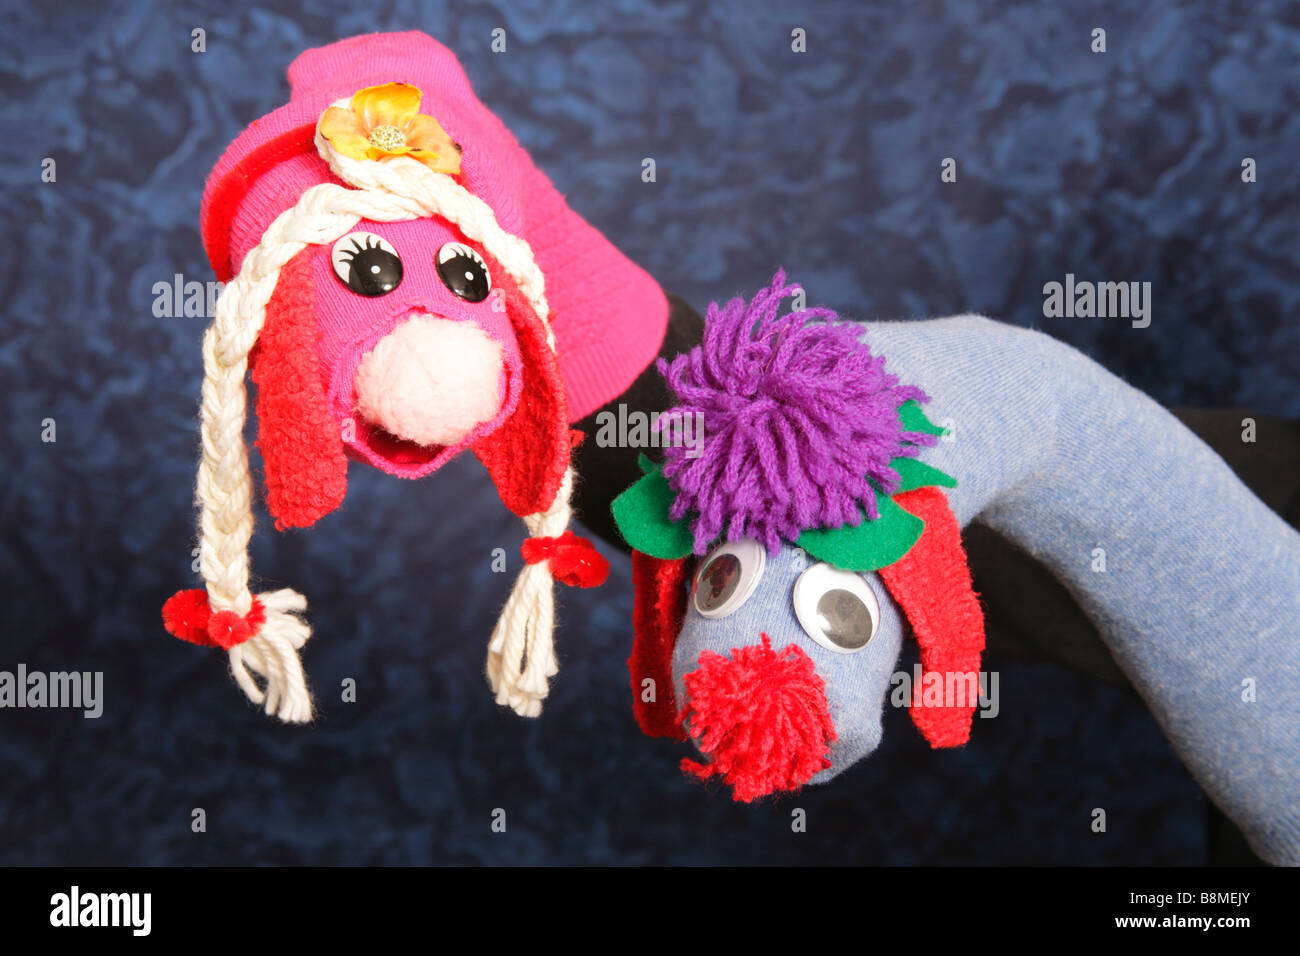 Hand manipulated character puppets created from socks. Stock Photo